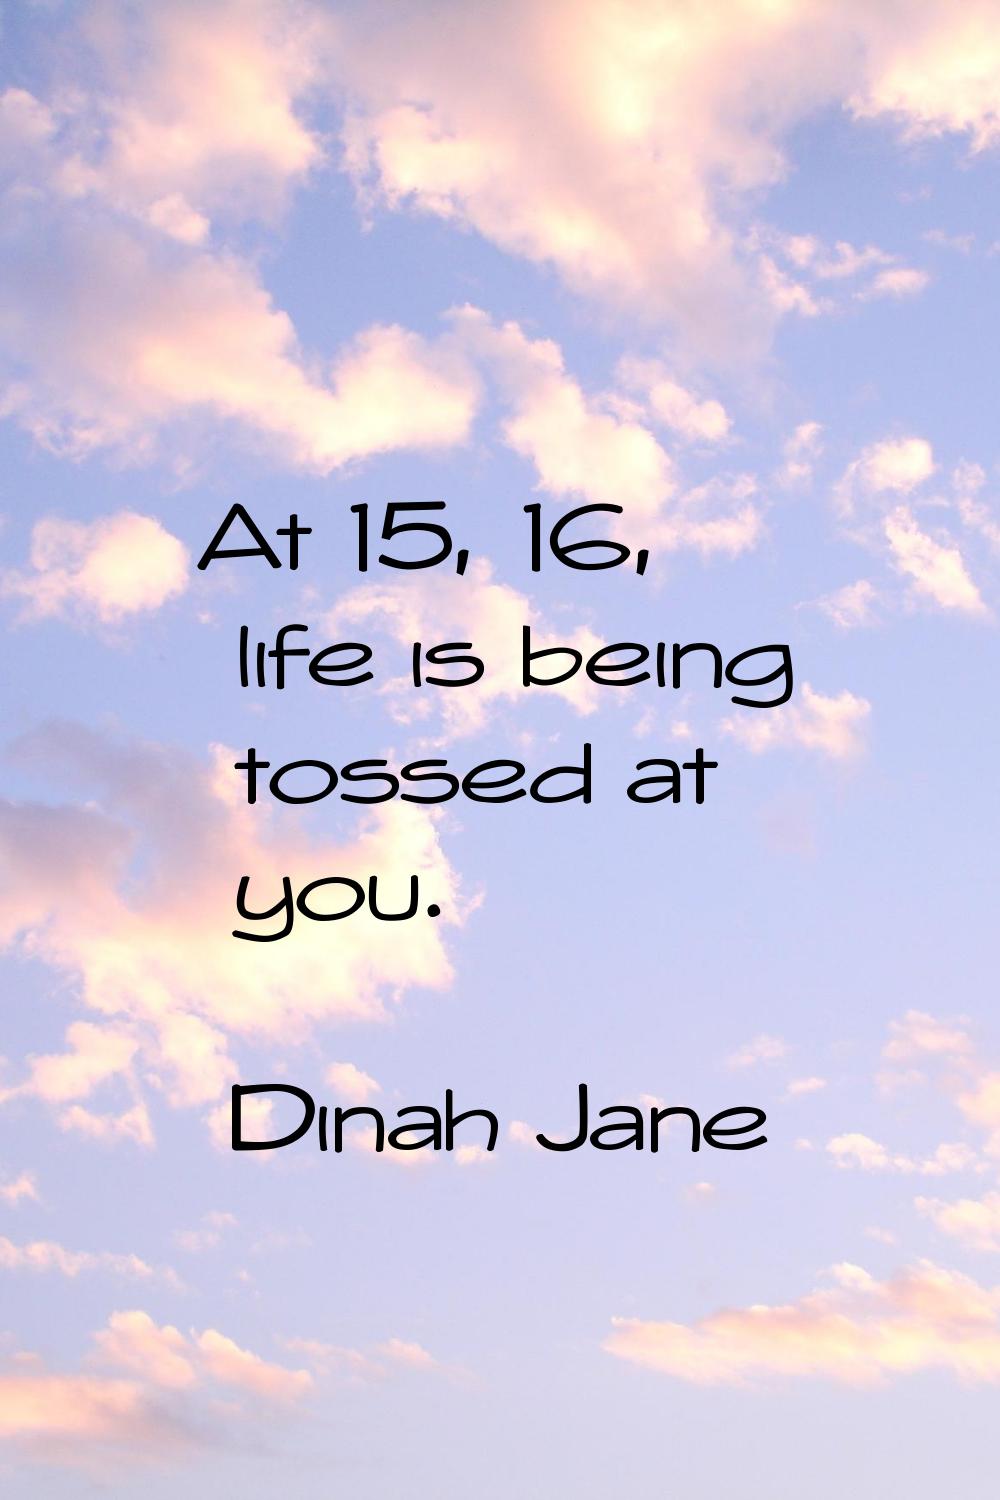 At 15, 16, life is being tossed at you.